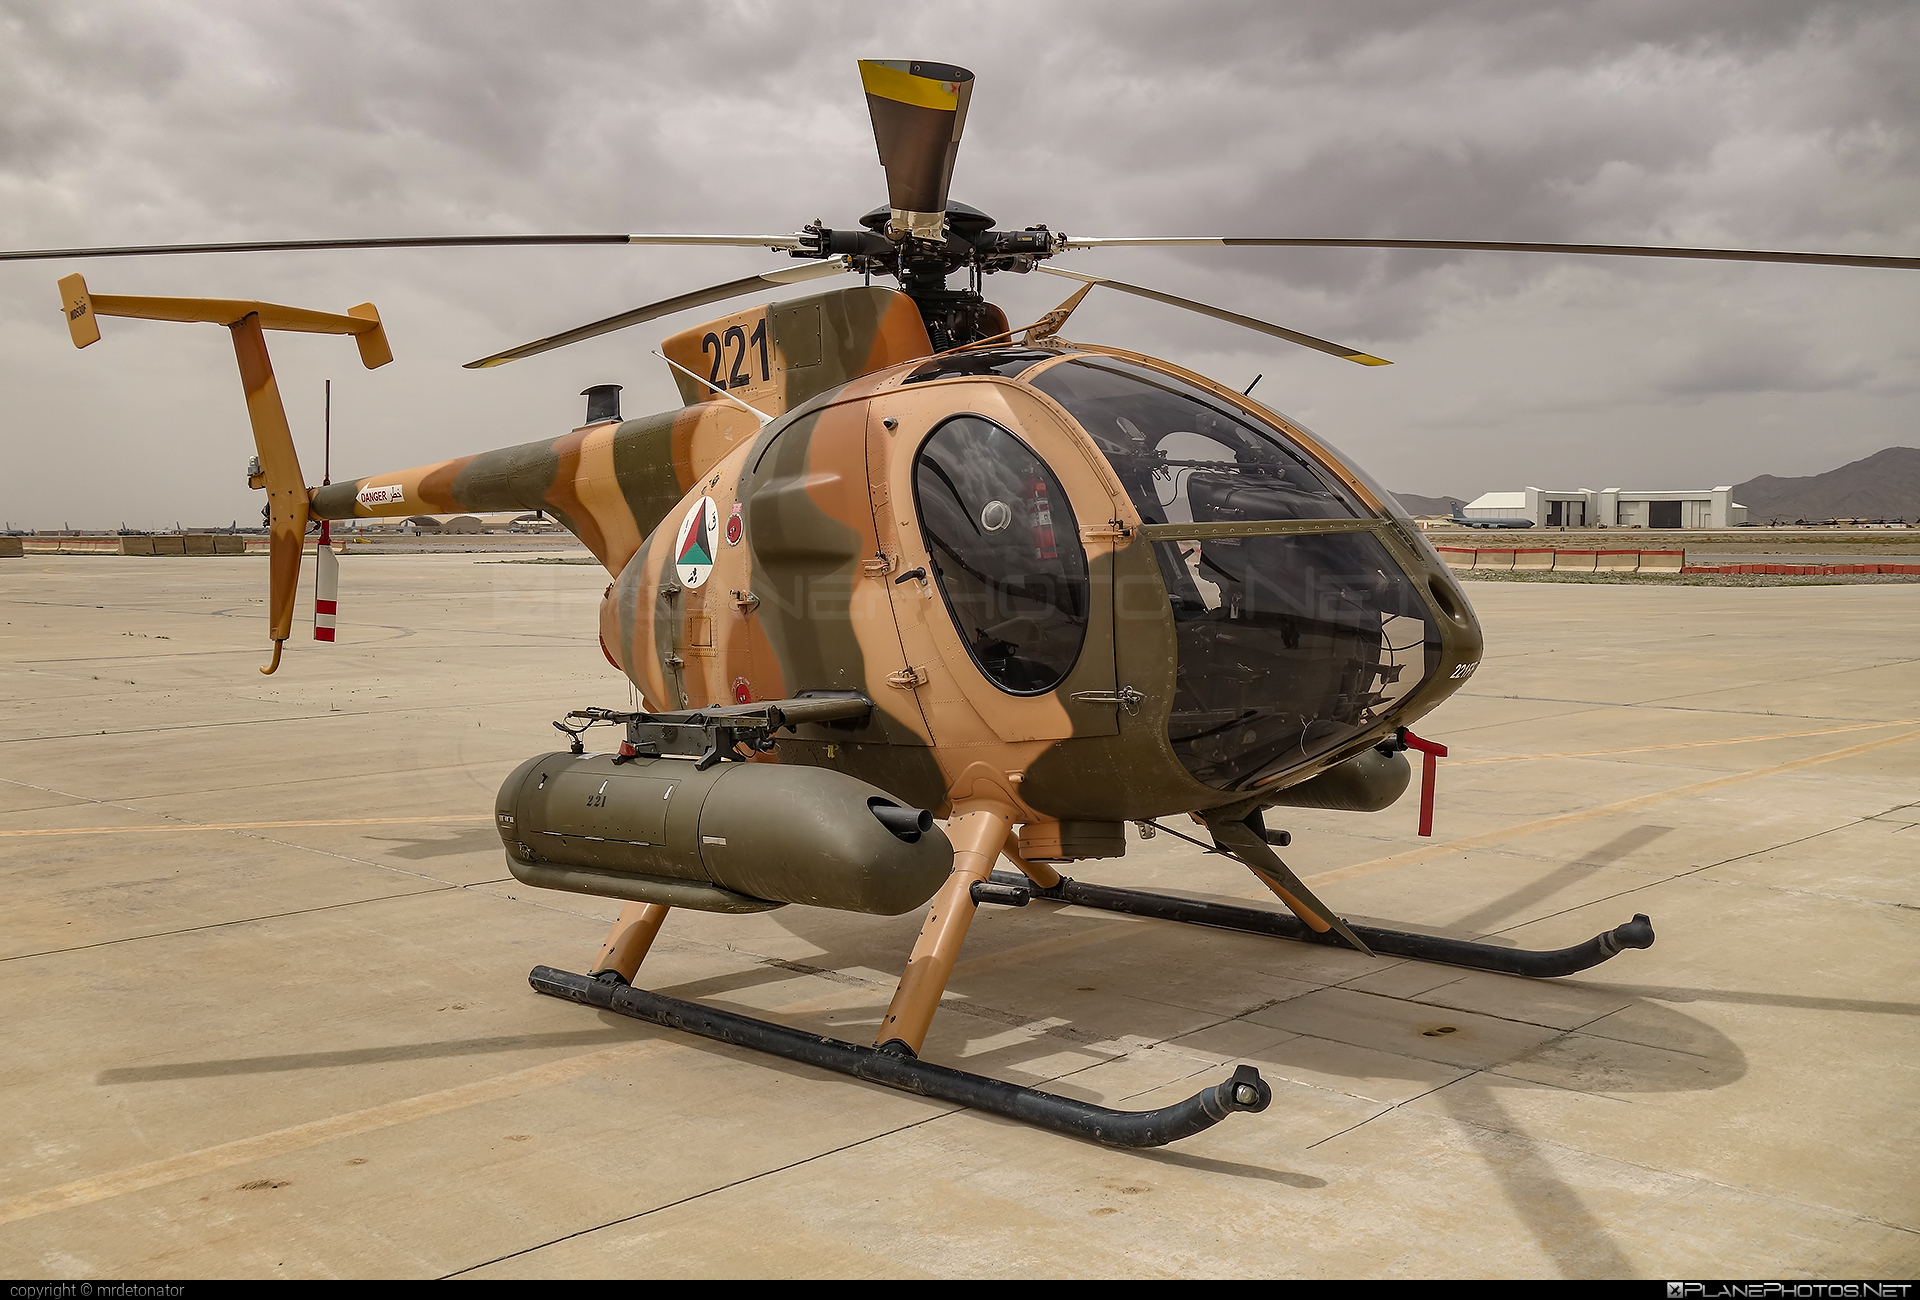 MD Helicopters MD-530F - 221 operated by Afghan Air Force #afghanairforce #md530f #mdhelicopters #mdhelicopters500 #mdhelicoptersmd530f